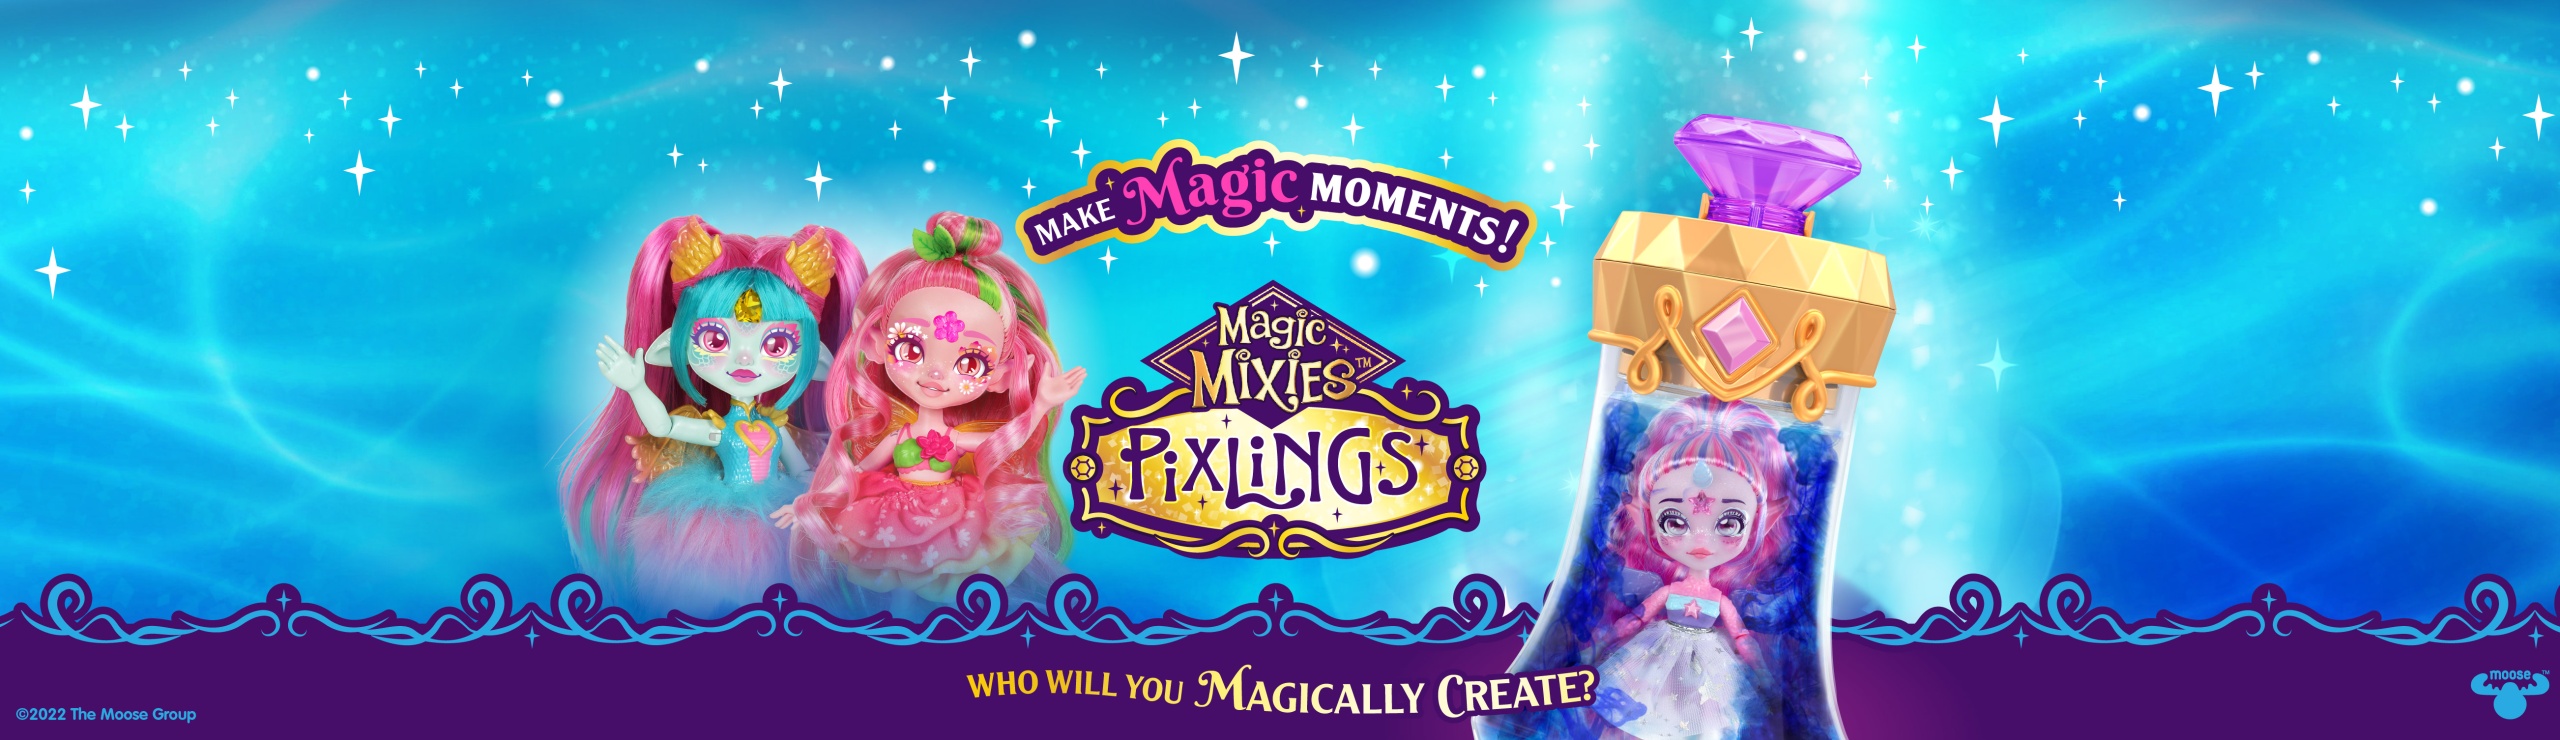 MAGIC MIXIES PIXLINGS - The Toy Book